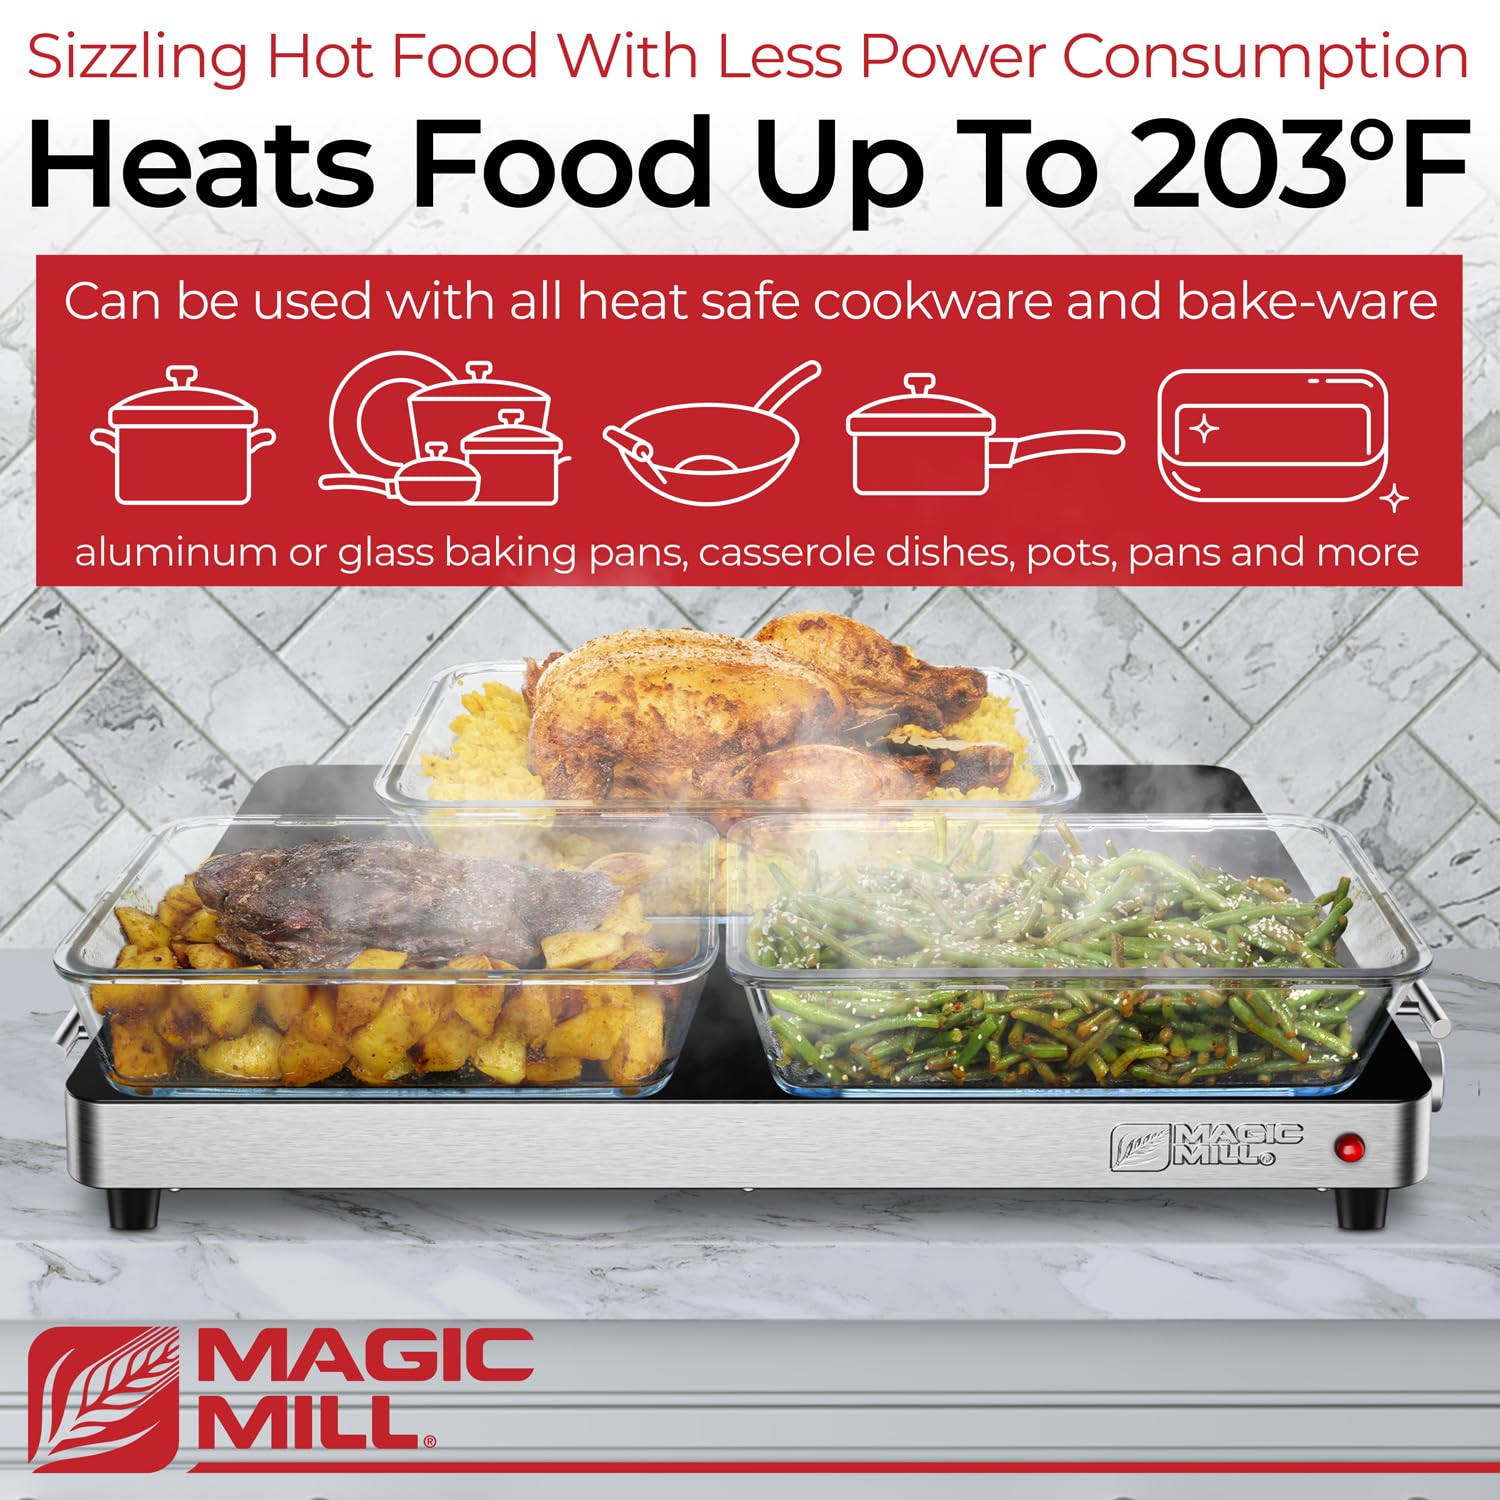 Magic Mill Extra Large Food Warmer for Parties | Electric Server Warming Tray, Hot Plate, with Adjustable Temperature Control, for Buffets, Restaurants, House Parties, Party Events (21" x 16")  - Very Good